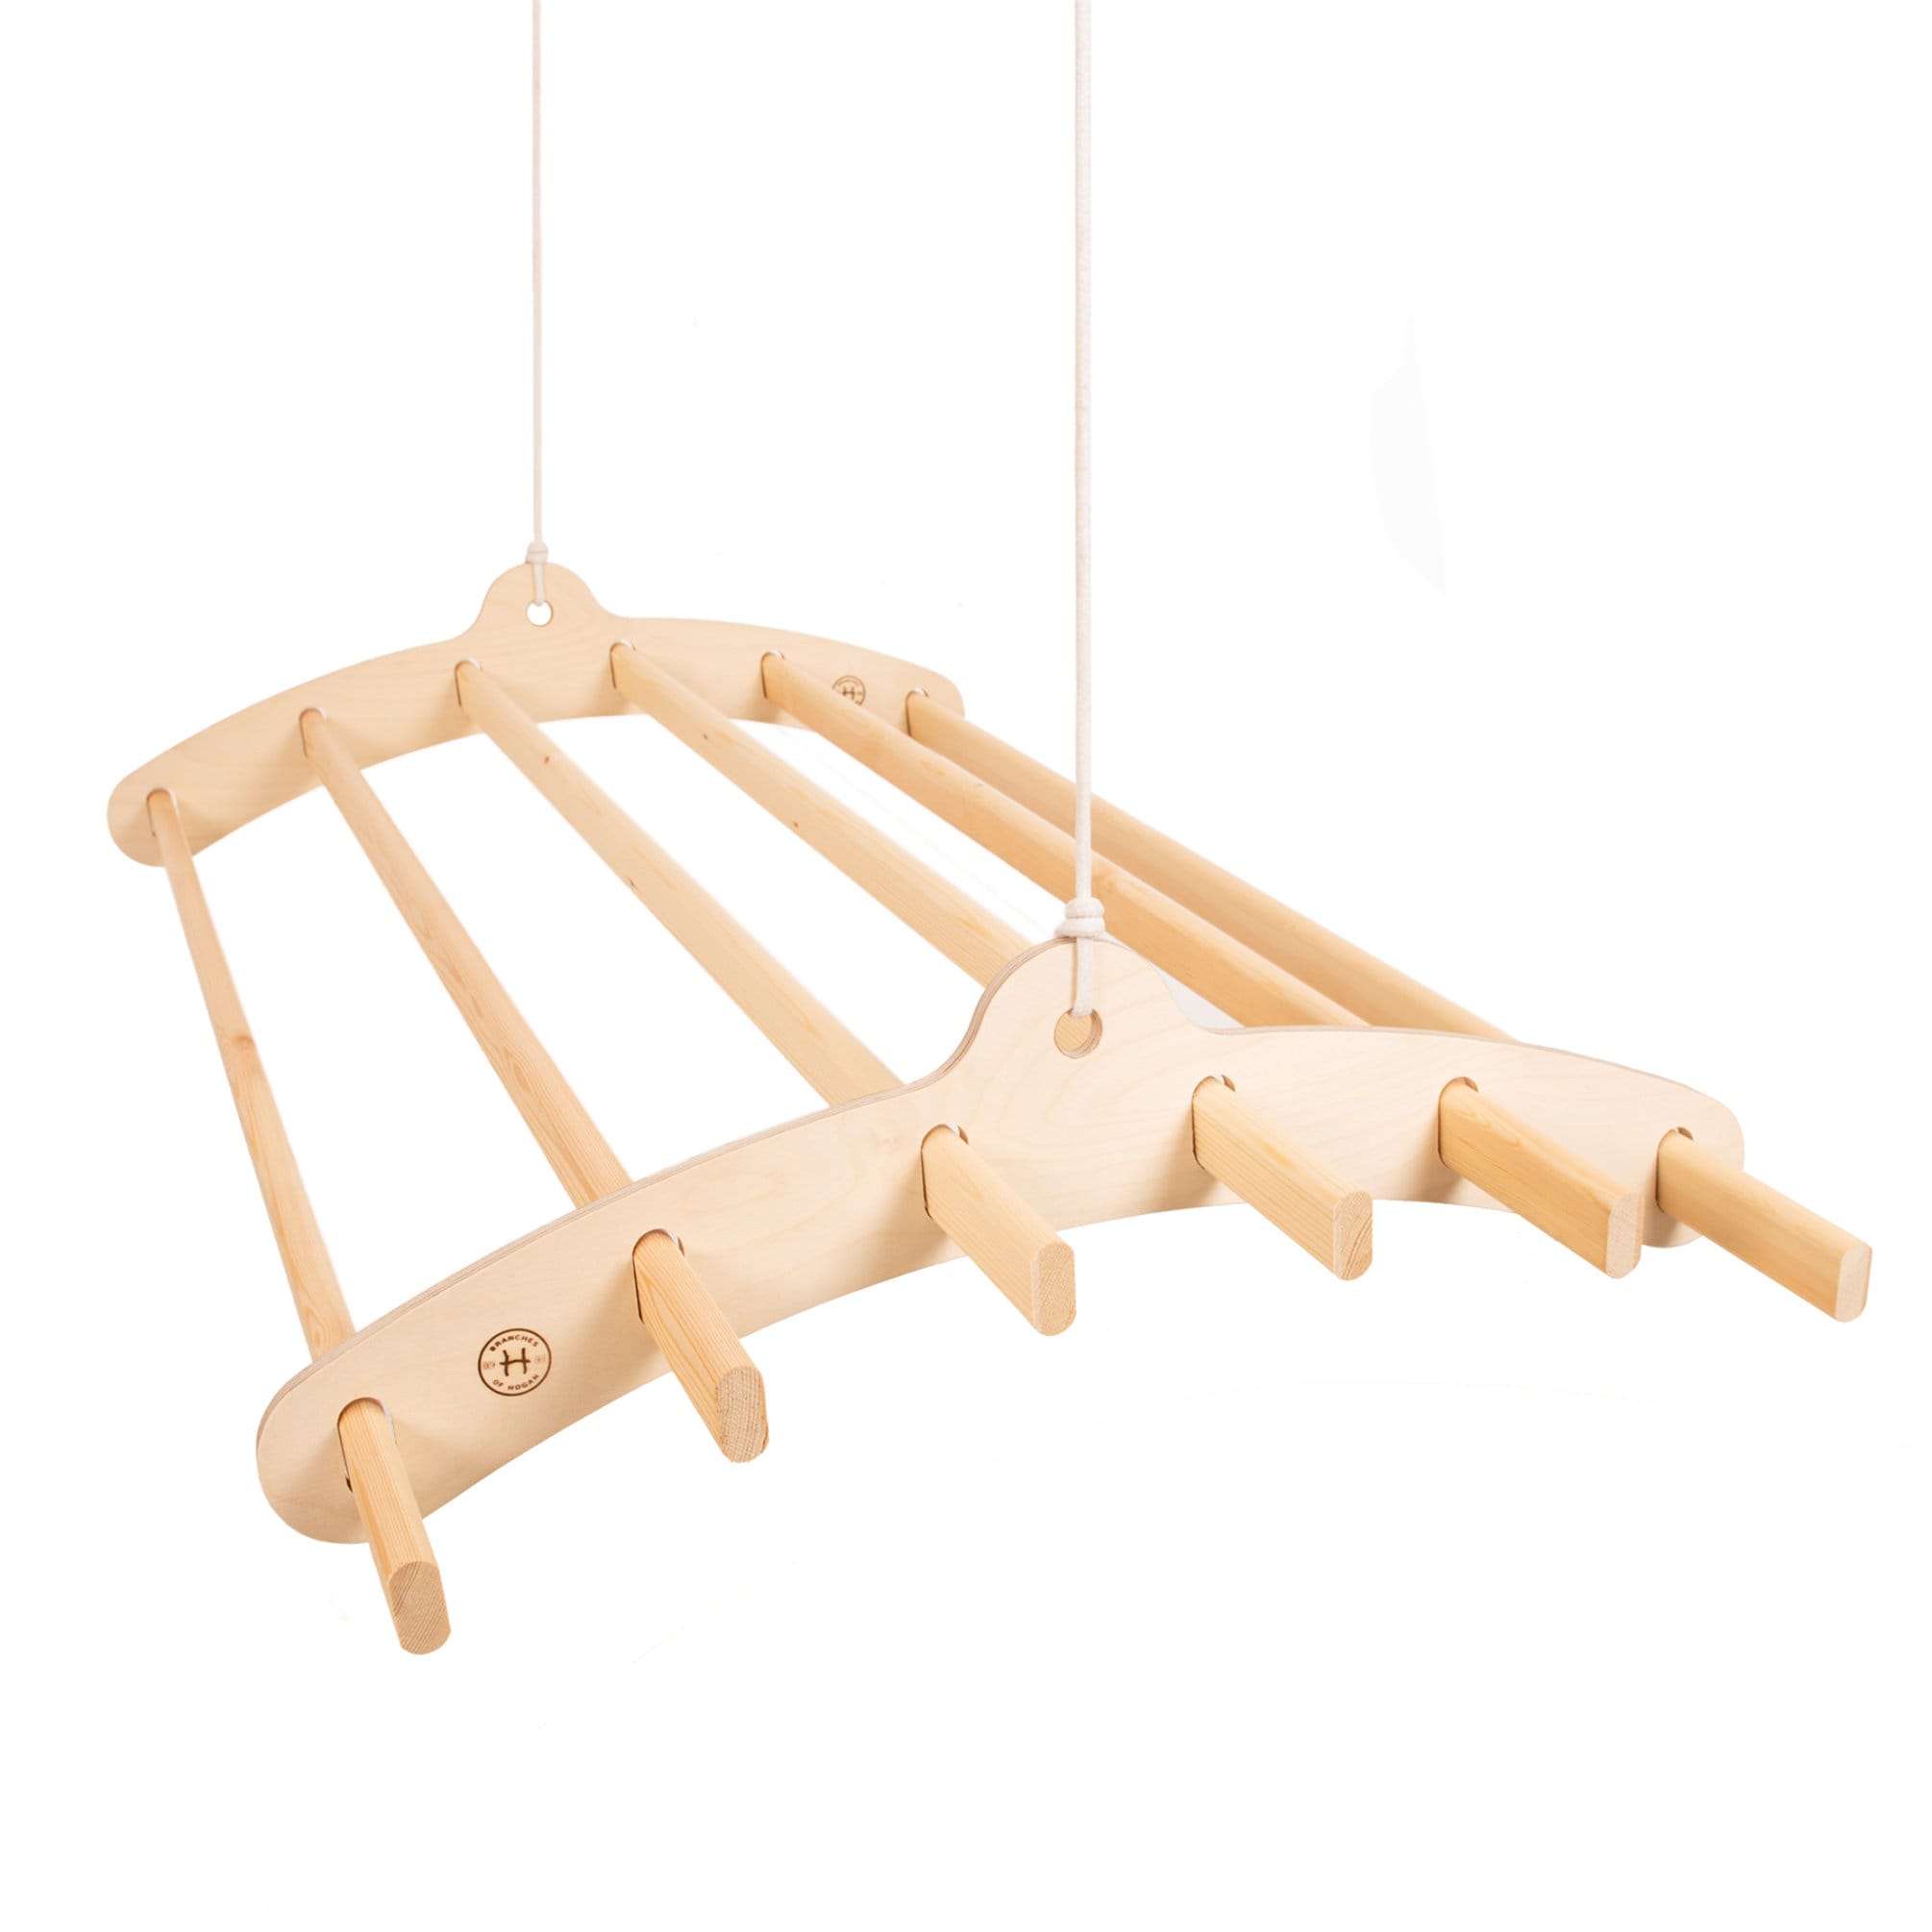 Wooden Foldable Clothes Airer, Clothes Drying Rack. Puidust